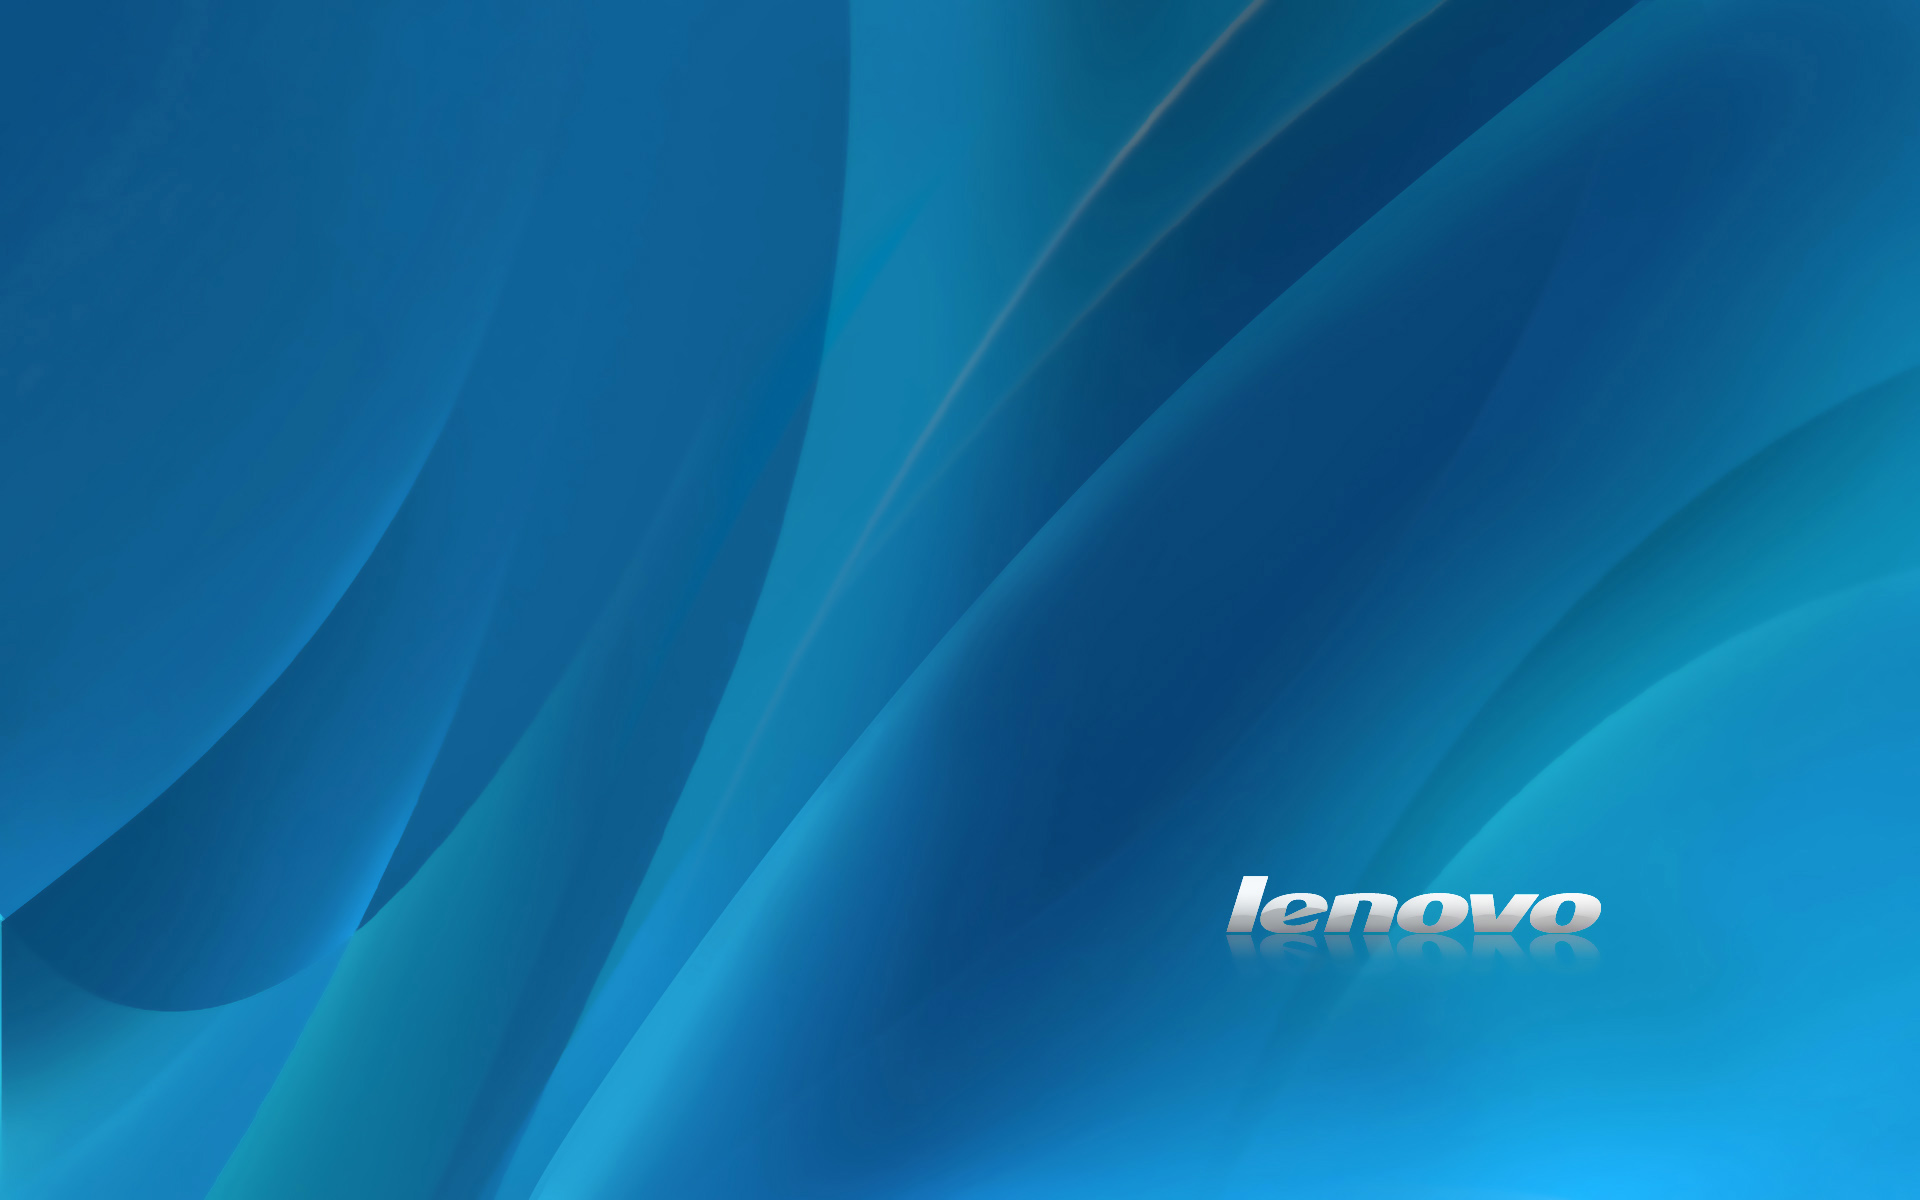 Lenovo Wallpaper - Lenovo Wallpaper Hd , HD Wallpaper & Backgrounds